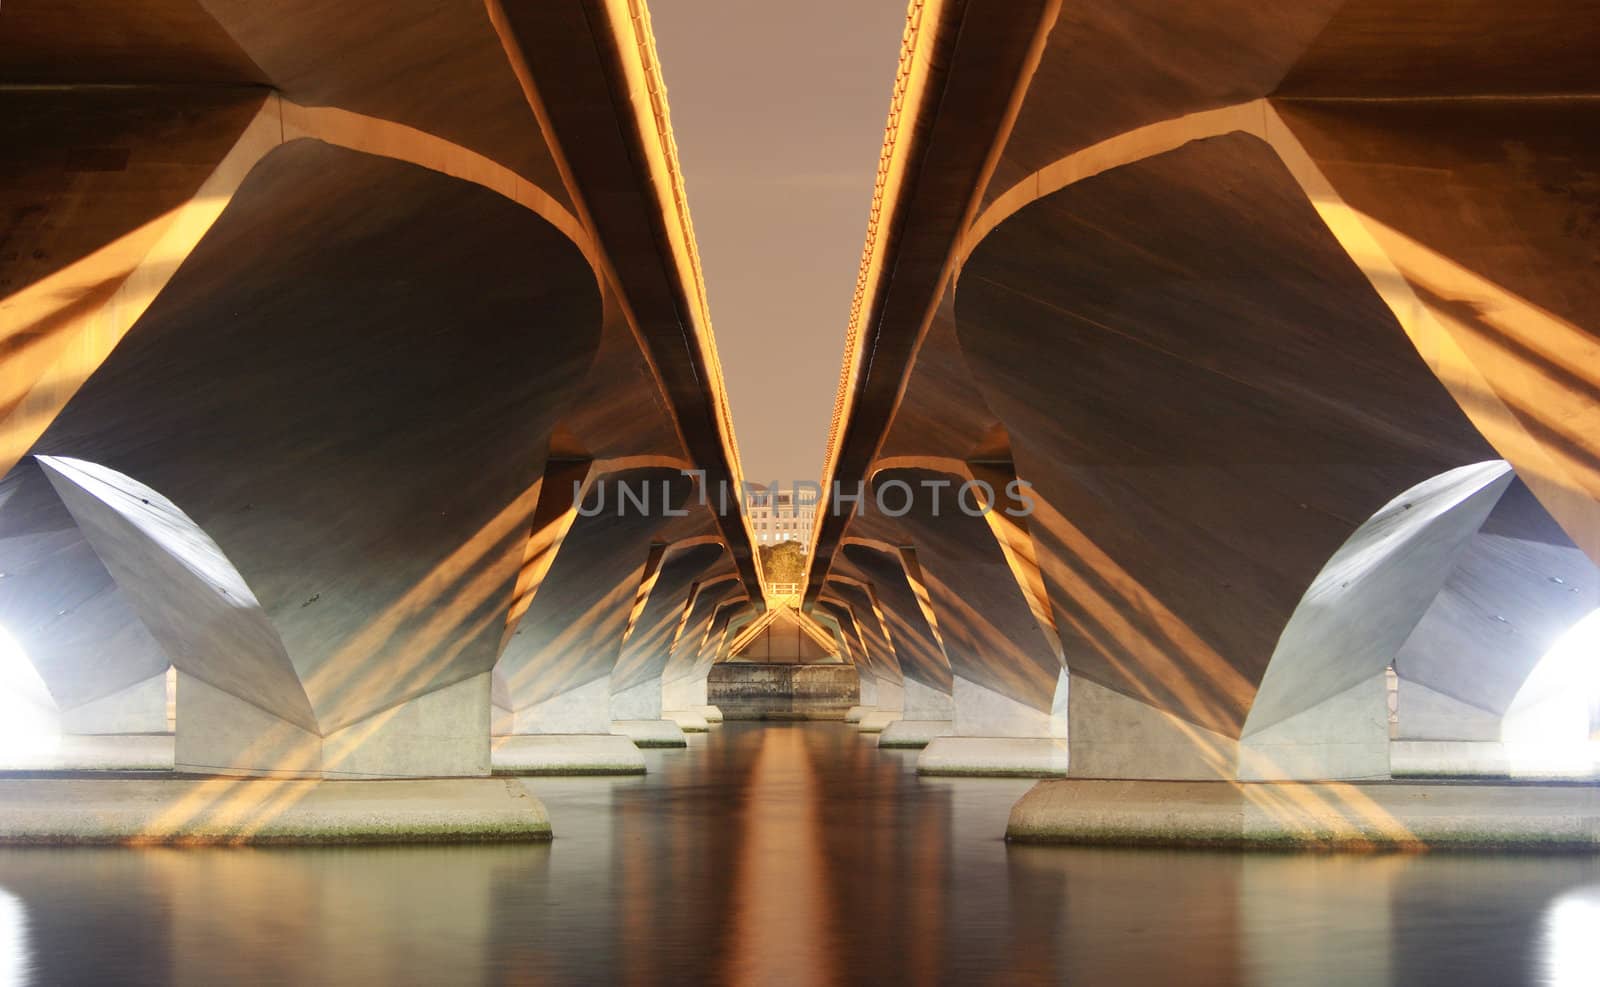 Image under a modern bridge taken from a futuristic angle